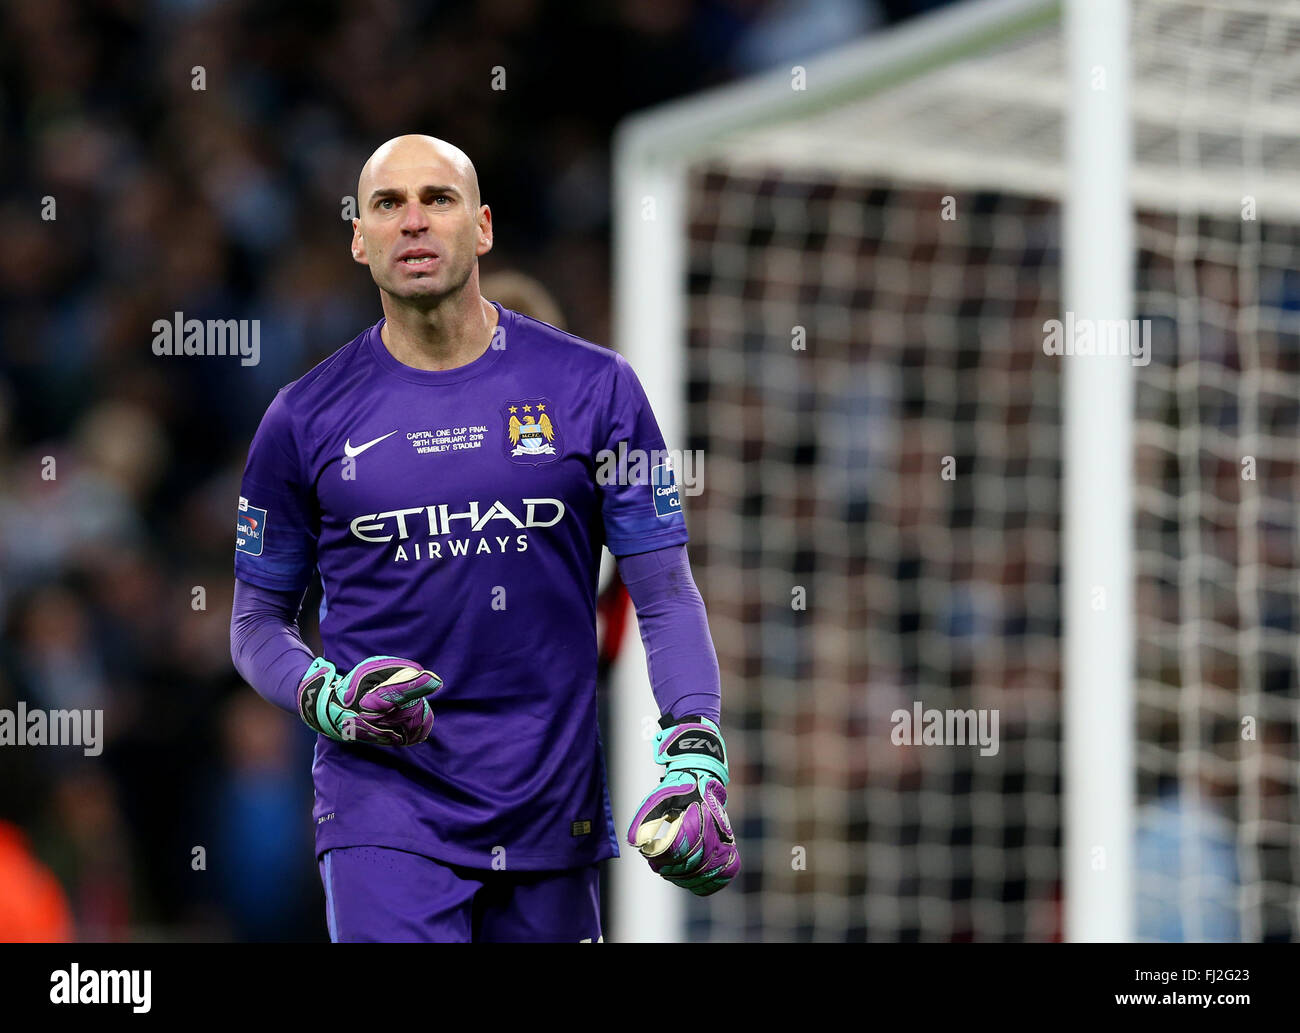 London, UK. 28th Feb, 2016. Manchester City goalkeeper Willy Caballero celebrates after saving a penalty kick during the League Cup final between Liverpool and Manchester City at Wembley Stadium in London, Britain on Feb. 28, 2016. Manchester City beat Liverpool on penalties to win the League Cup. Credit:  Han Yan/Xinhua/Alamy Live News Stock Photo